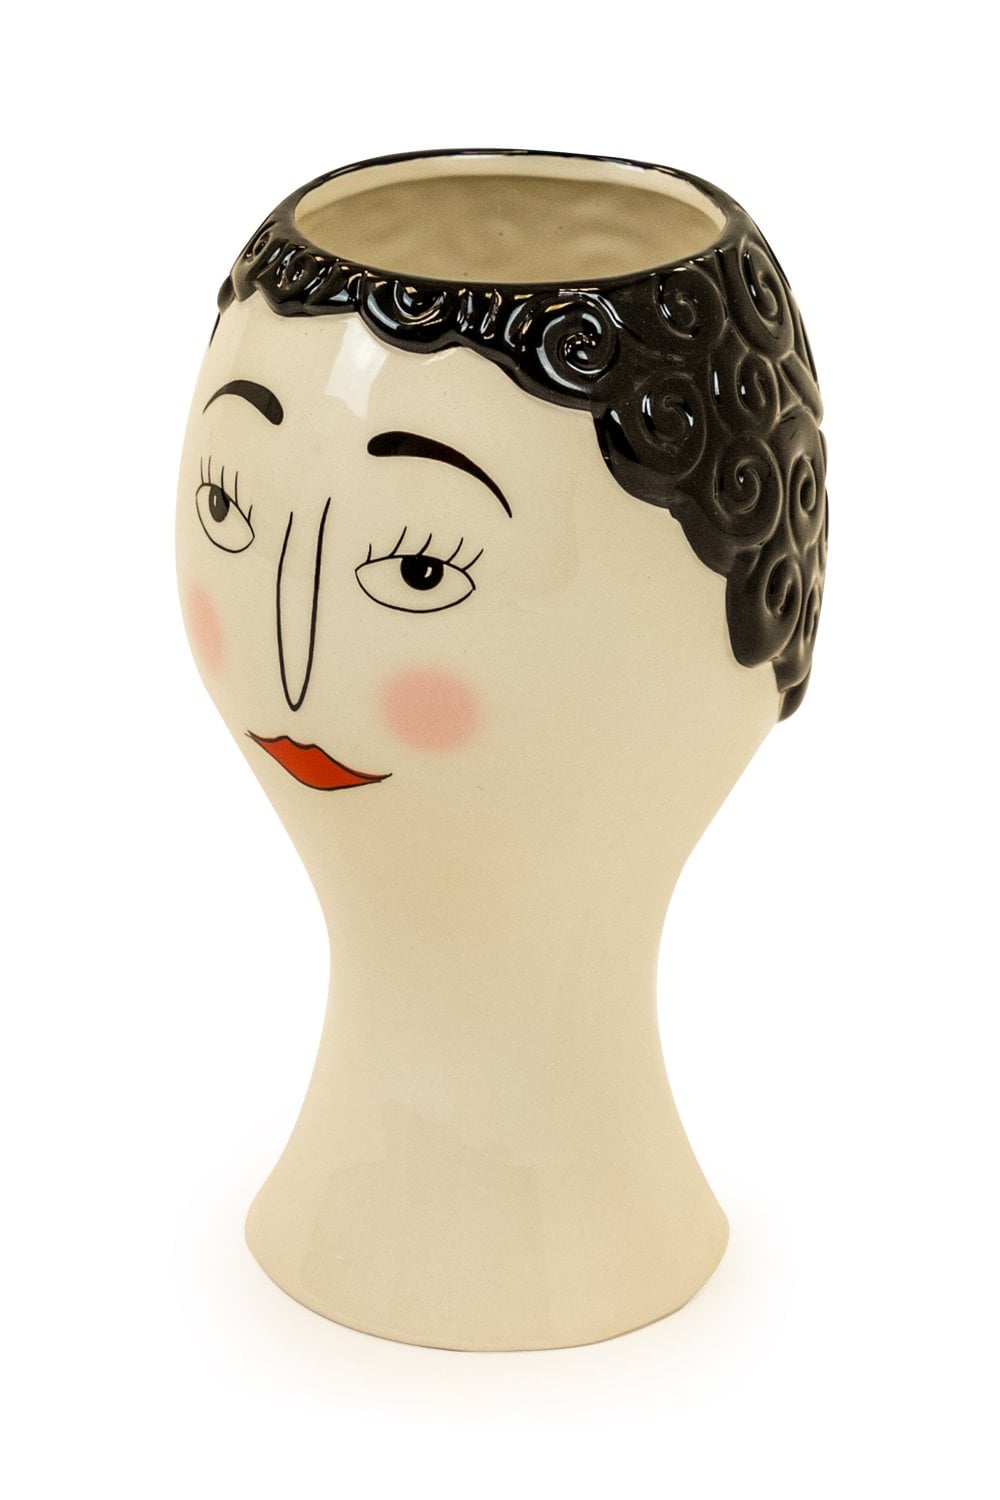 The Home Collection Illustrated Ladys Head Ceramic Vase